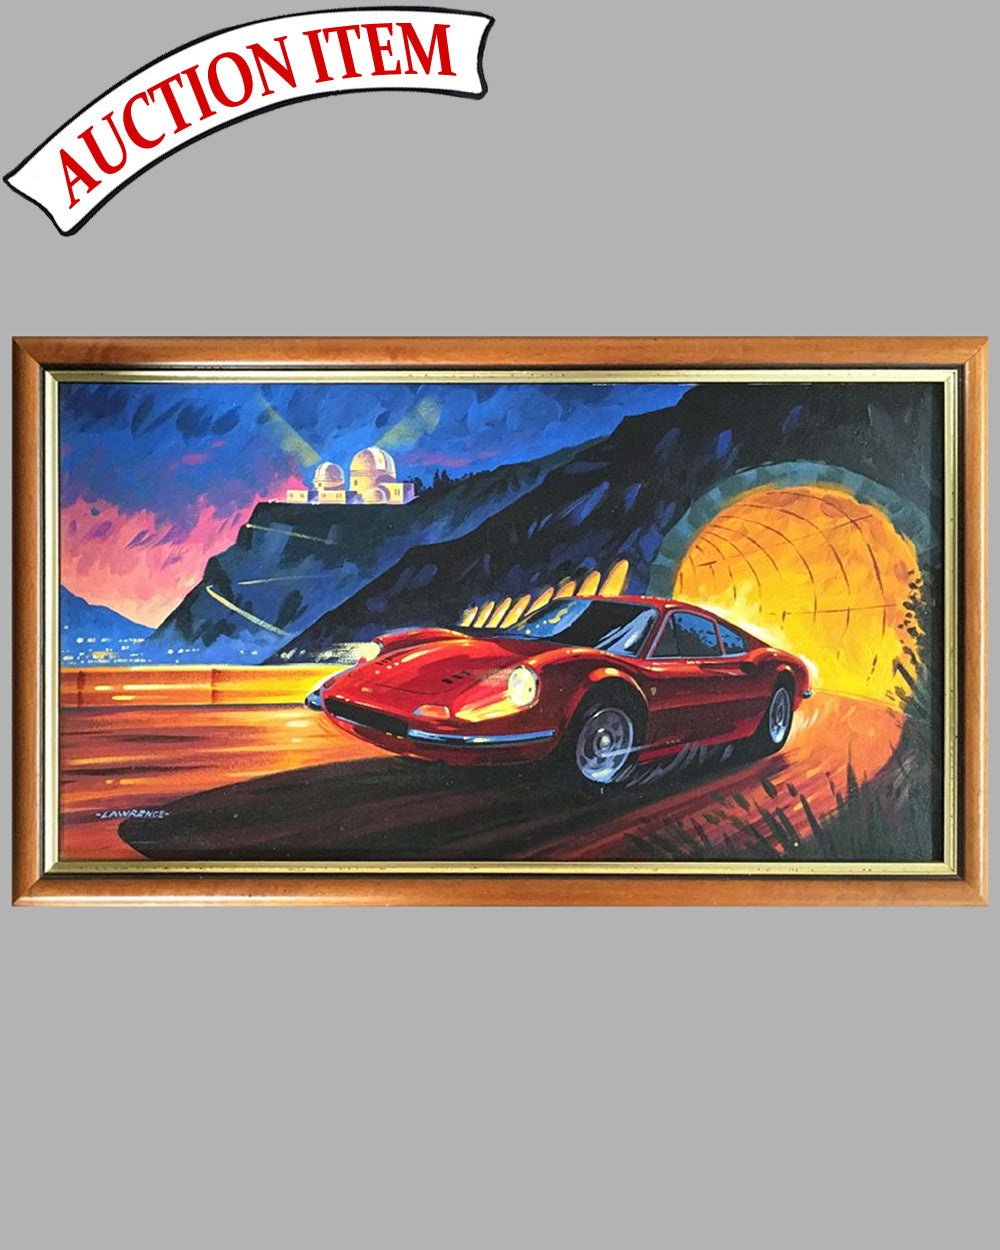 Fire in the Sky Ferrari 246 Dino Coupe painting by Joe Lawrence, U.K.